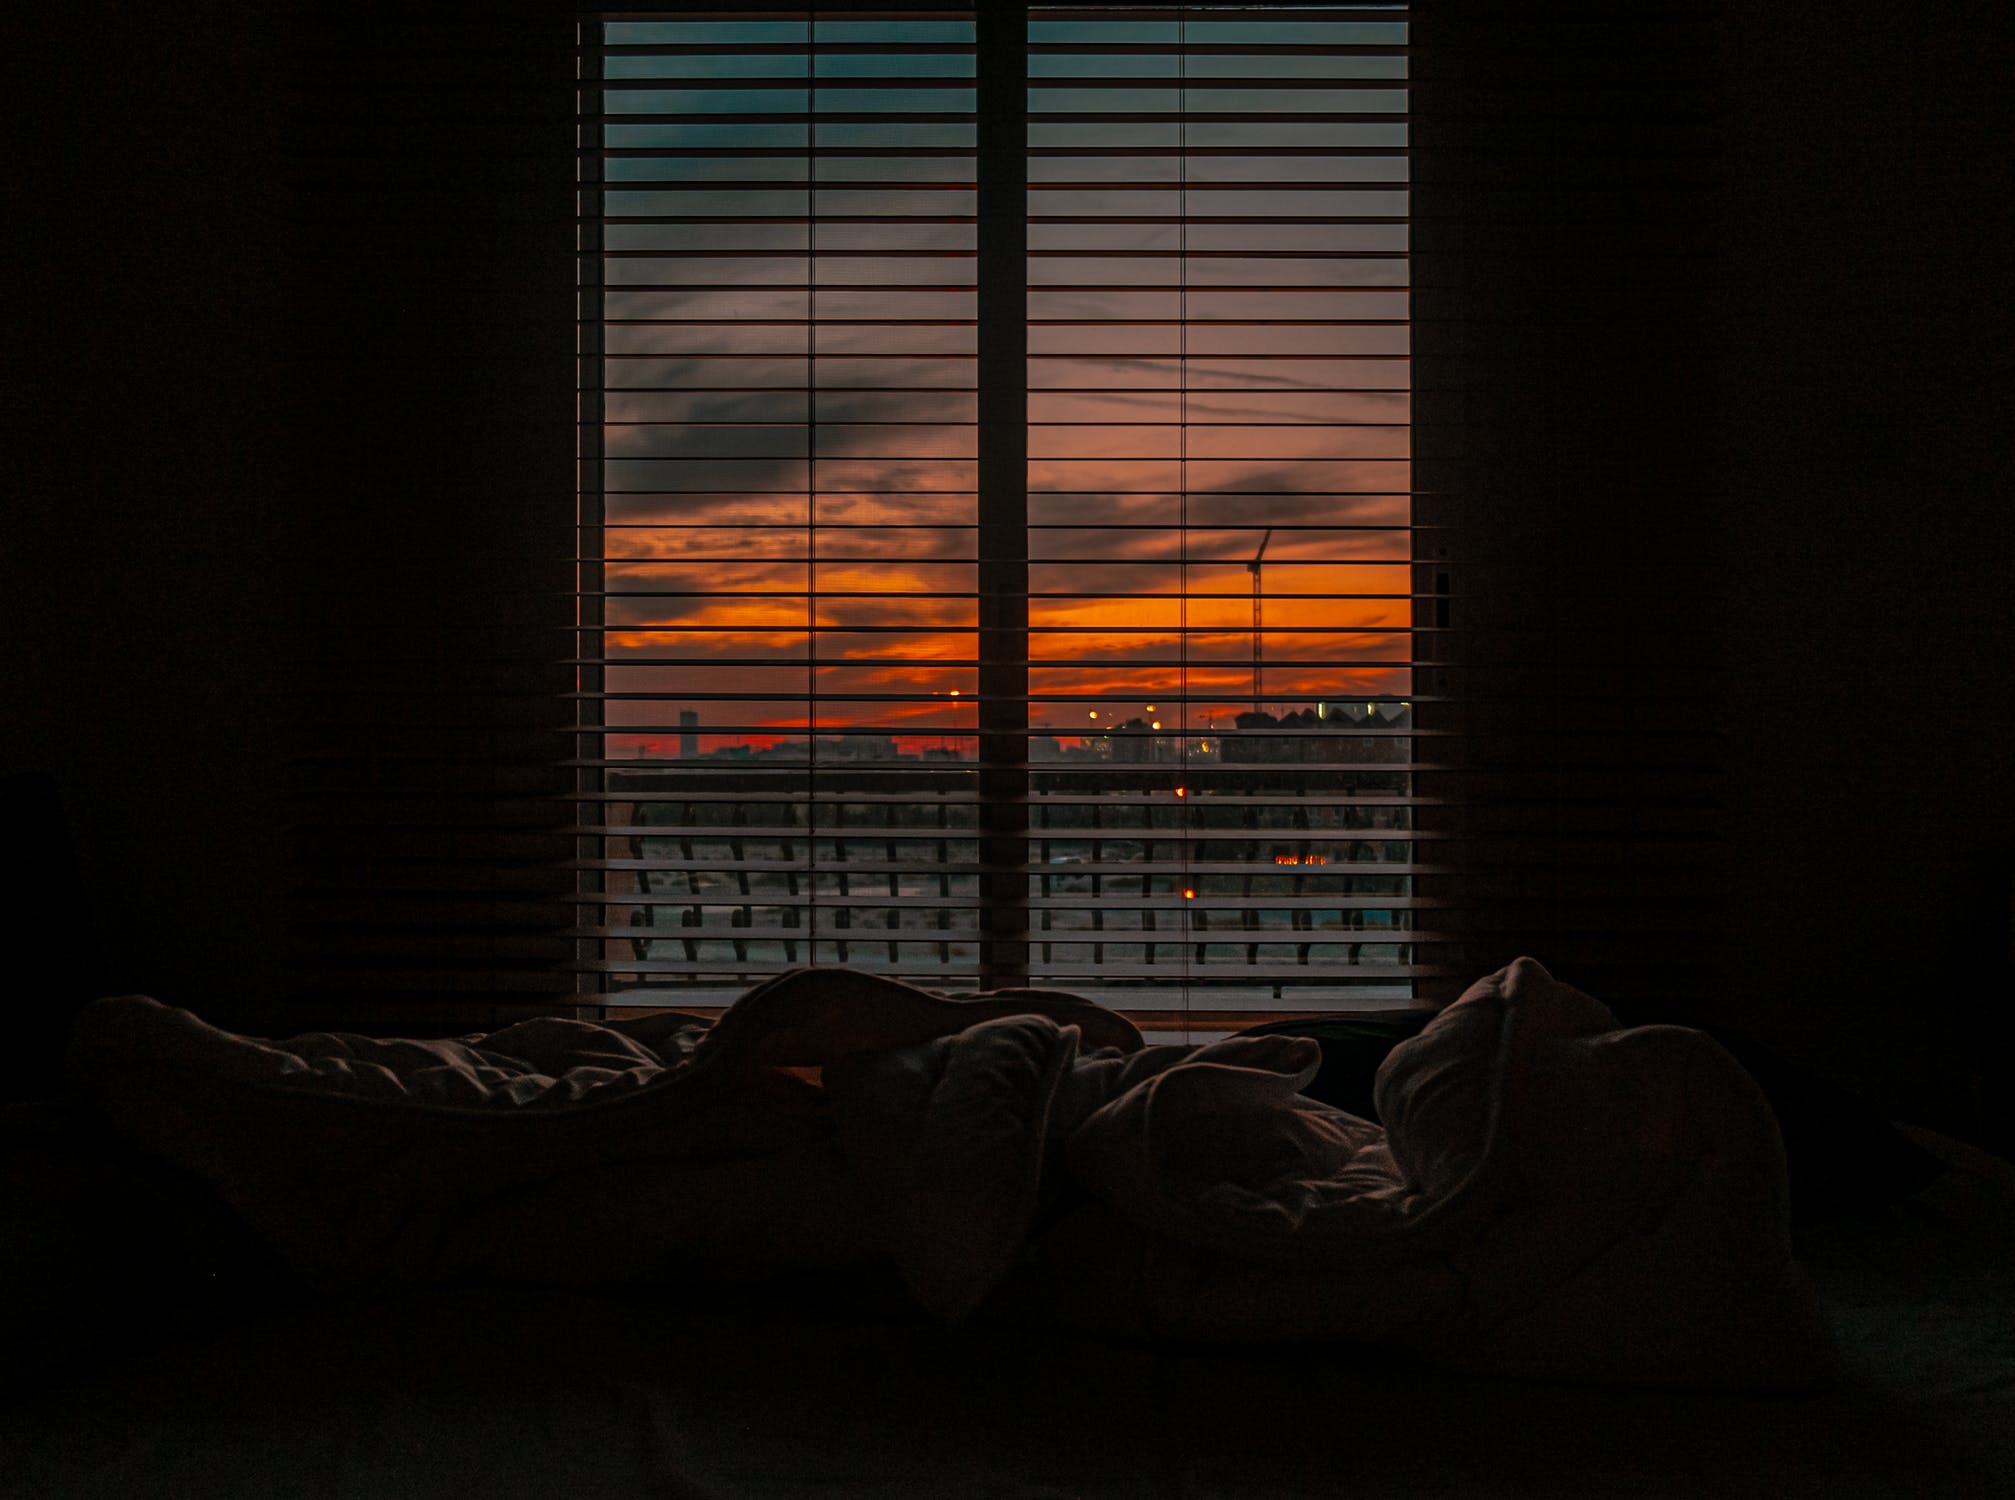 Sunset, sunrise, dark room with a bed